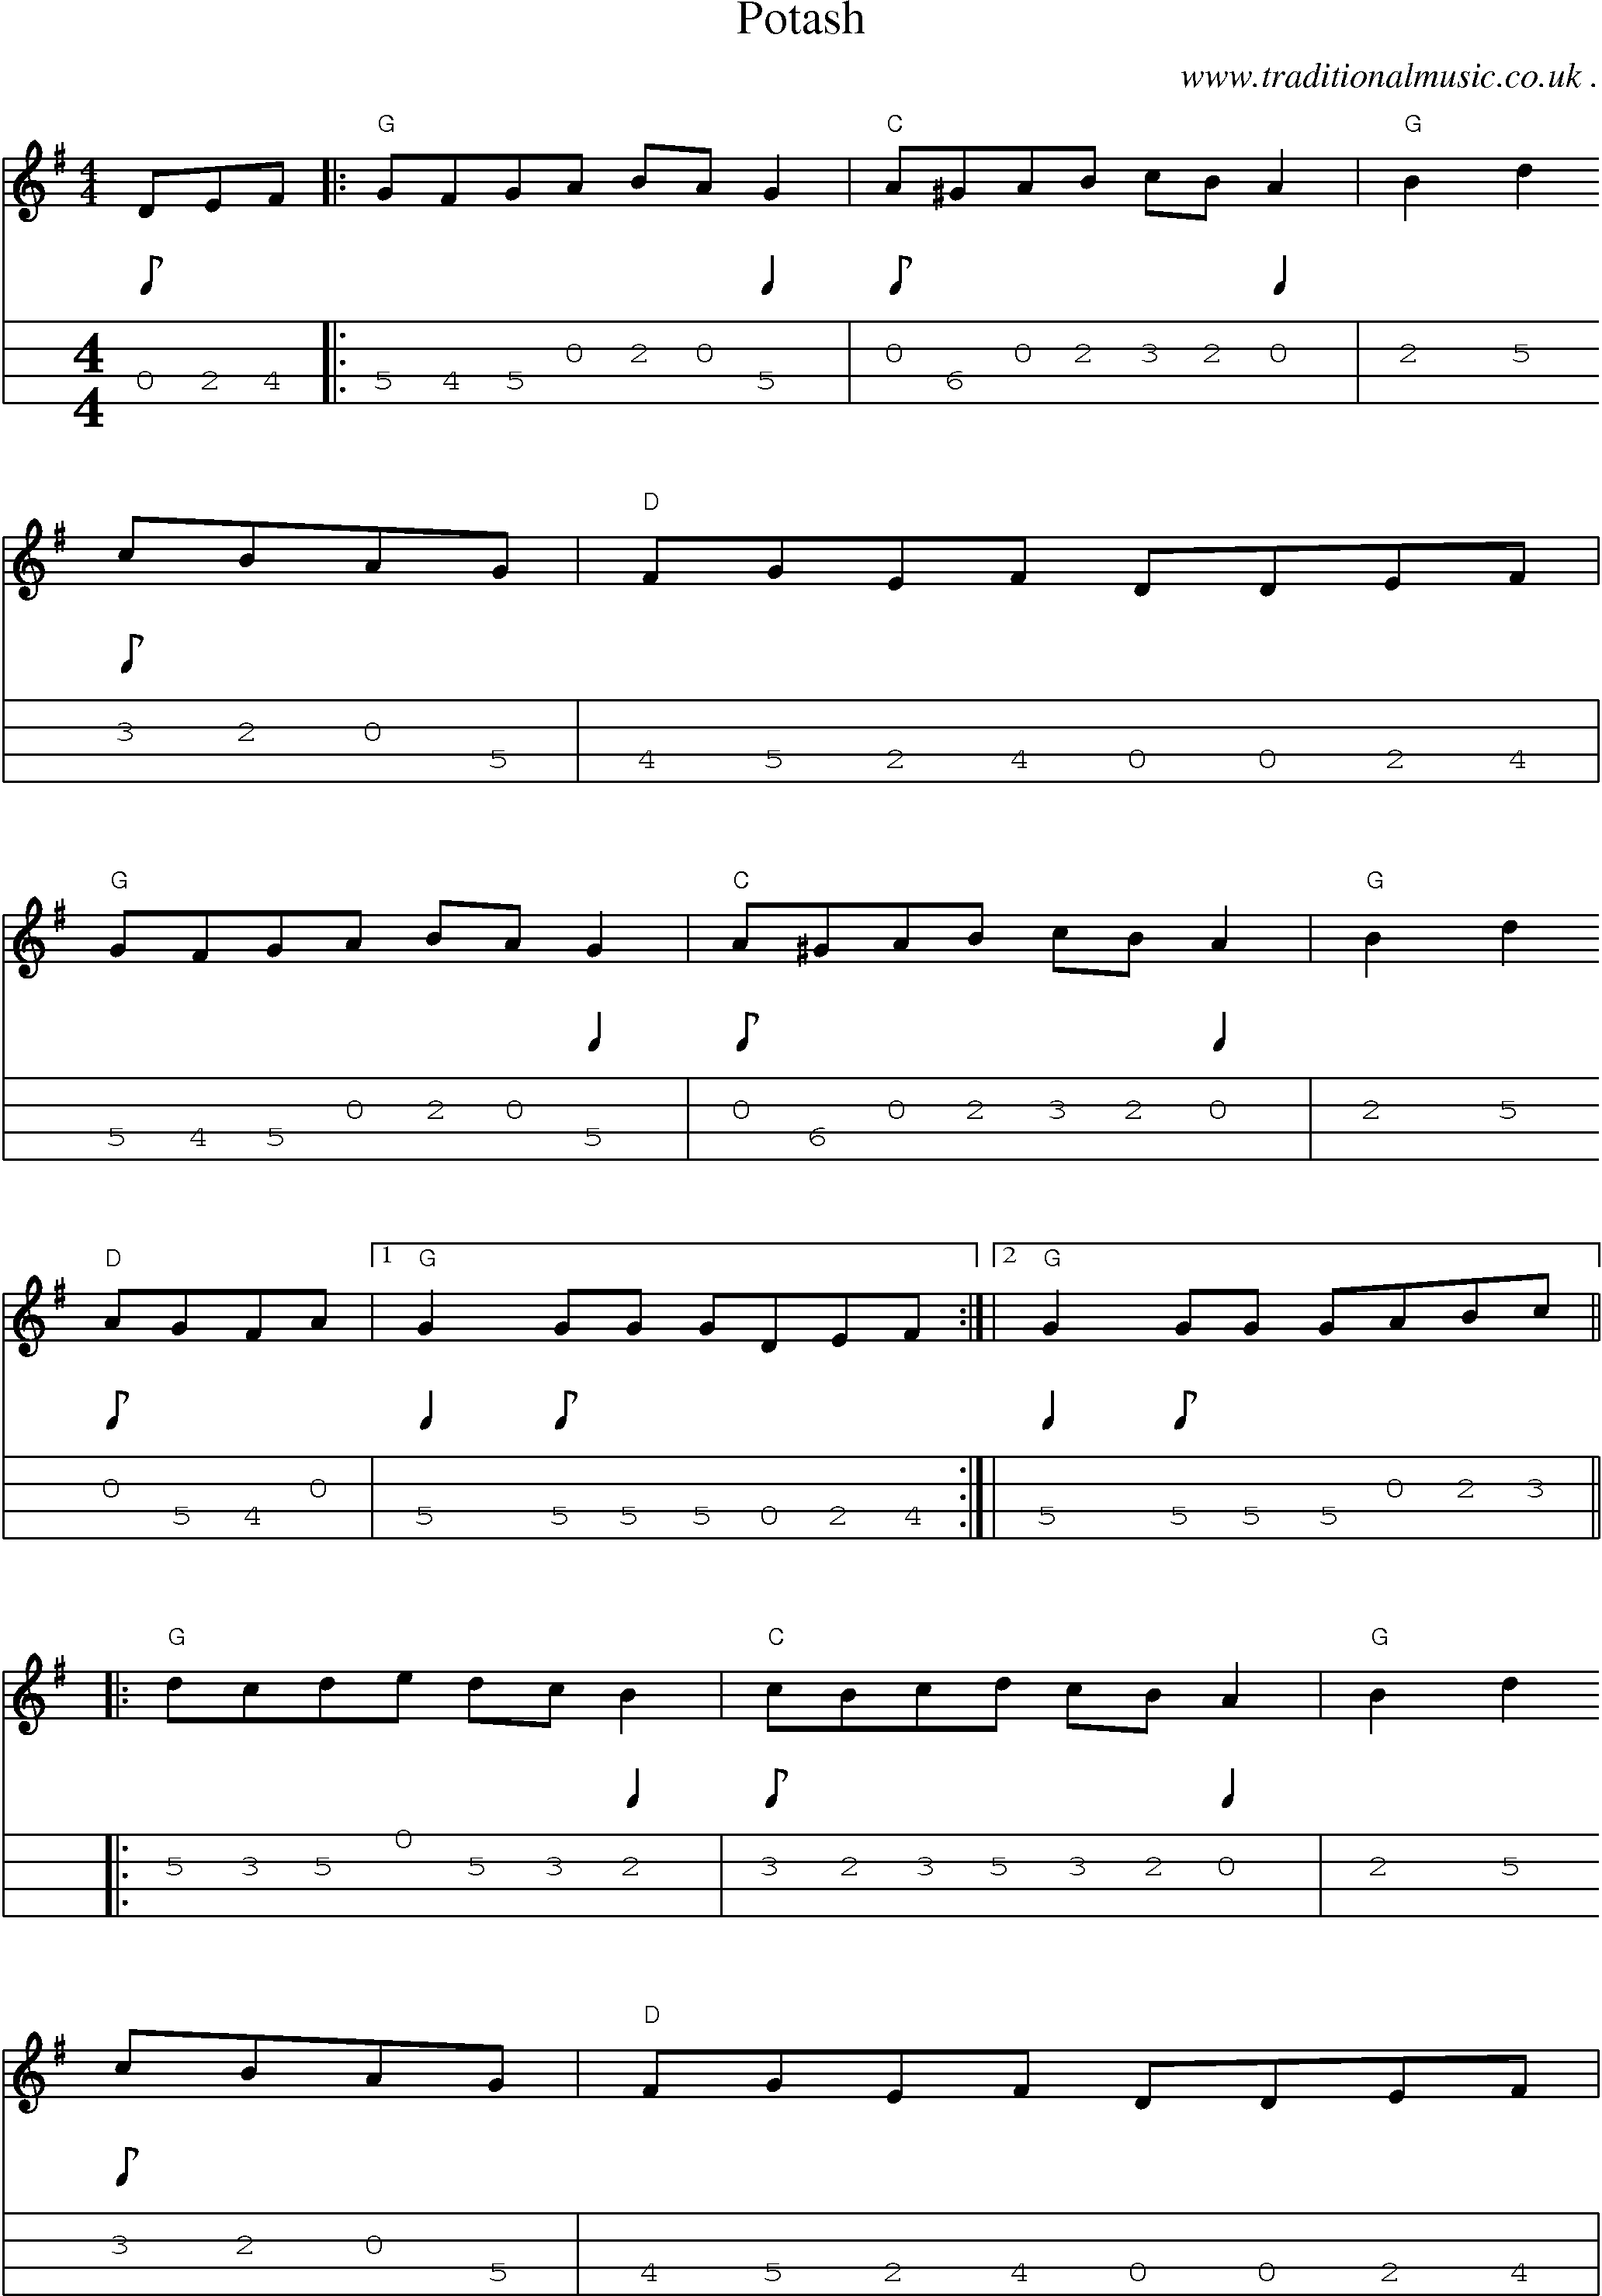 Sheet-music  score, Chords and Mandolin Tabs for Potash